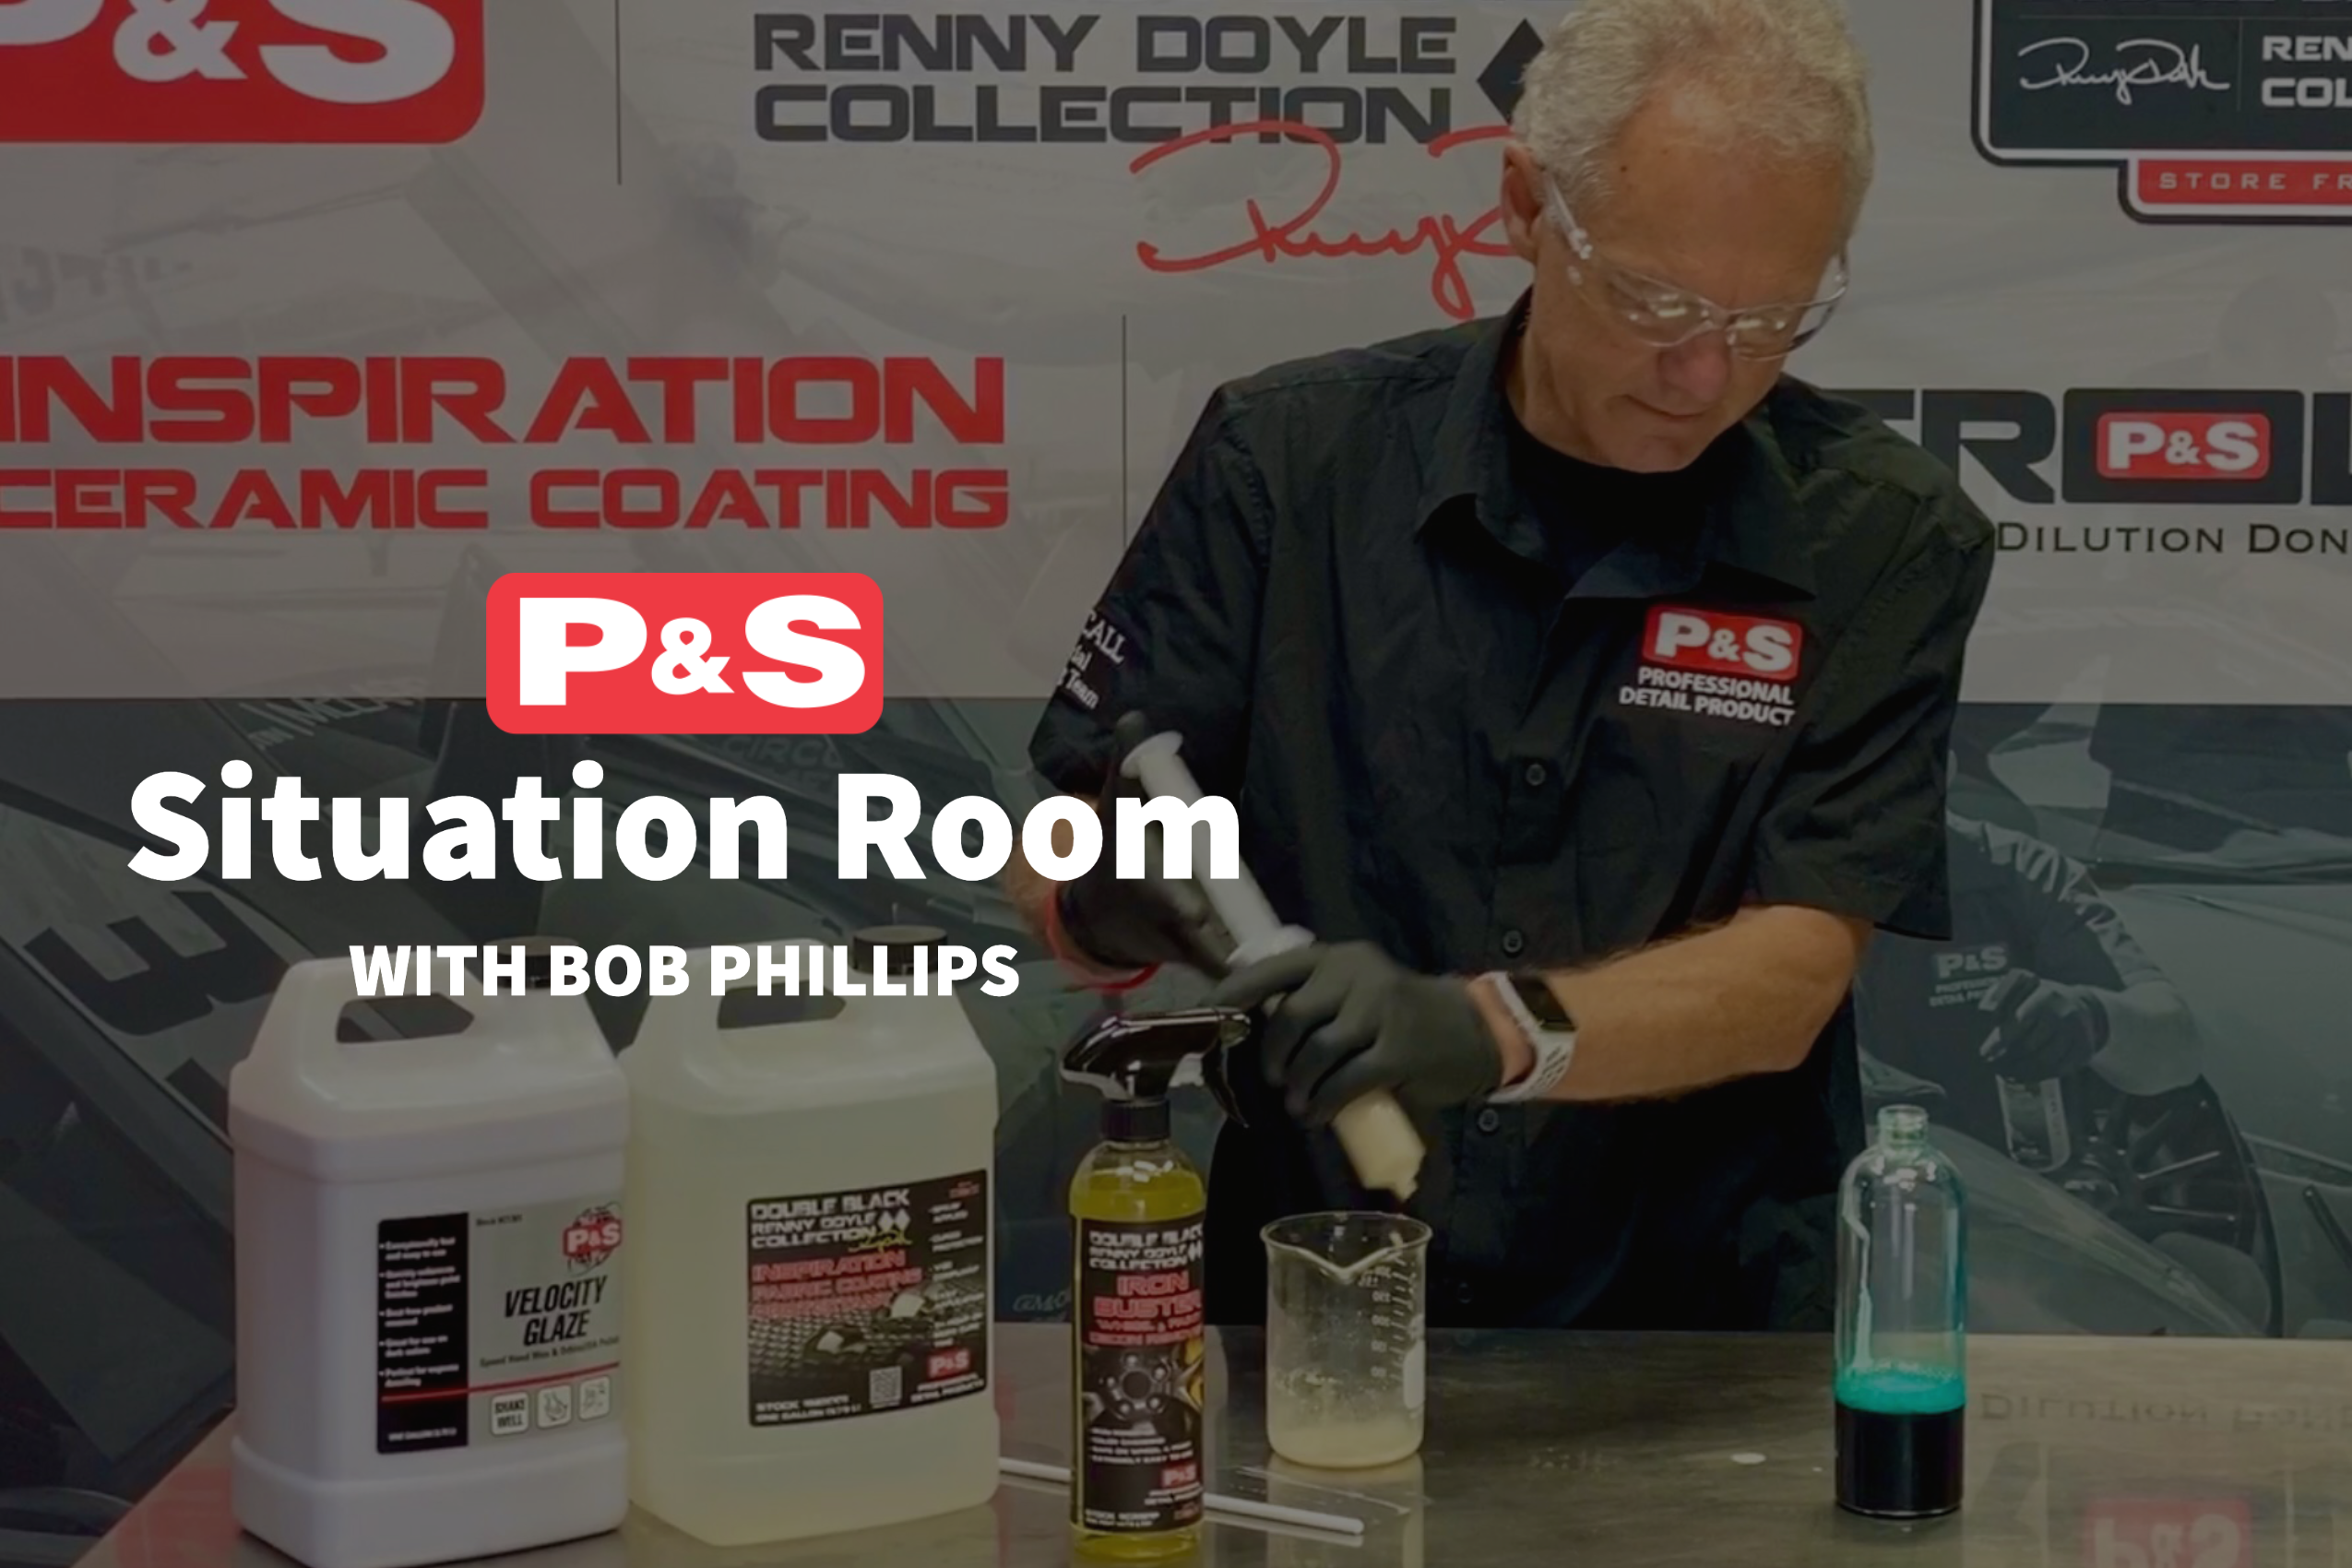 The Situation Room with Bob Phillips: The Value of a Staff Chemist